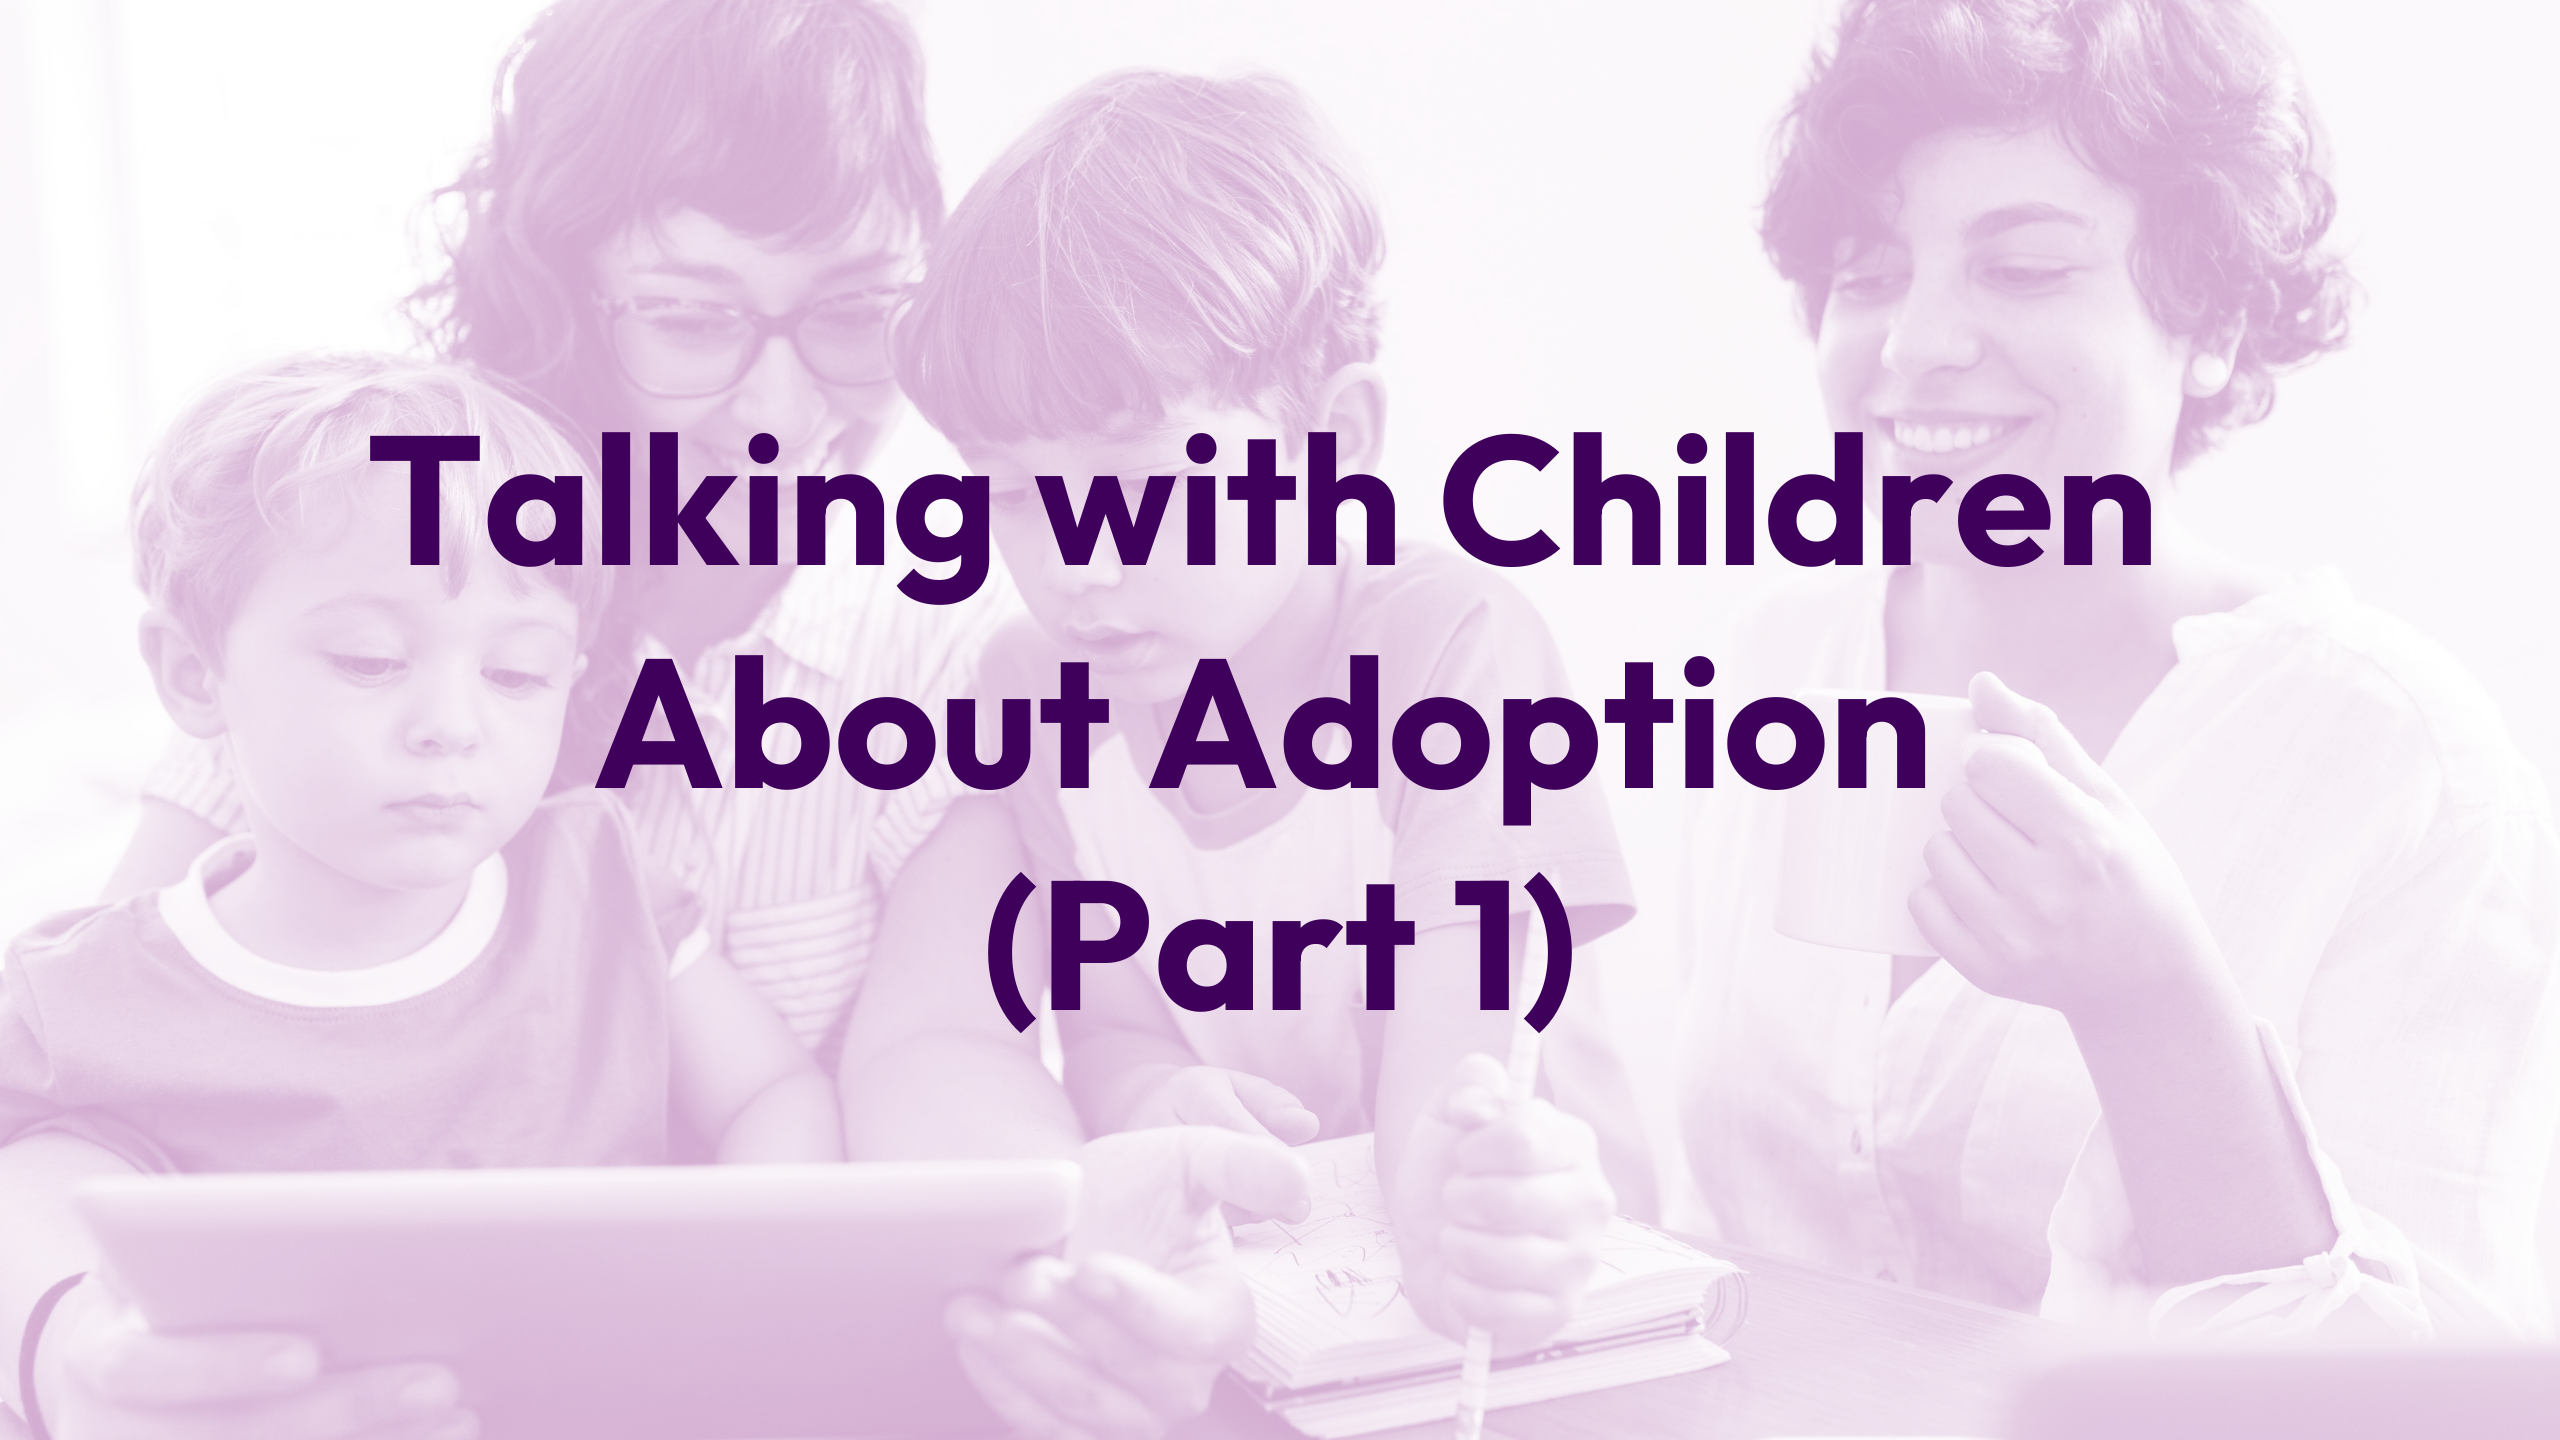 Talking with Your Children About Adoption (Part 1) Webinar